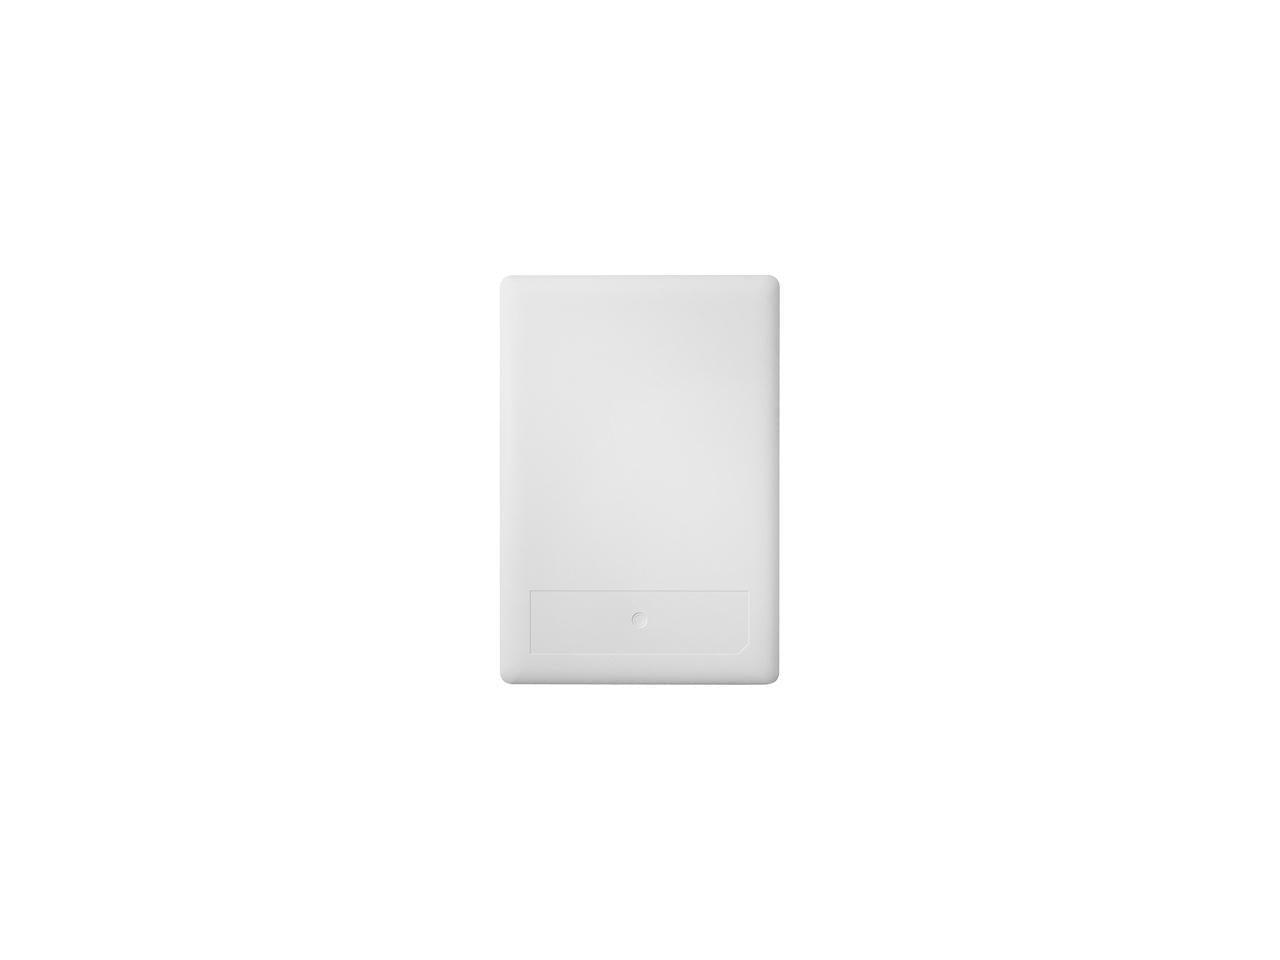 Seagate 2Tb Game Drive For Xbox Portable Hard Drive - Game Pass Special Edition Usb 3.0 Model Stea2000417 White